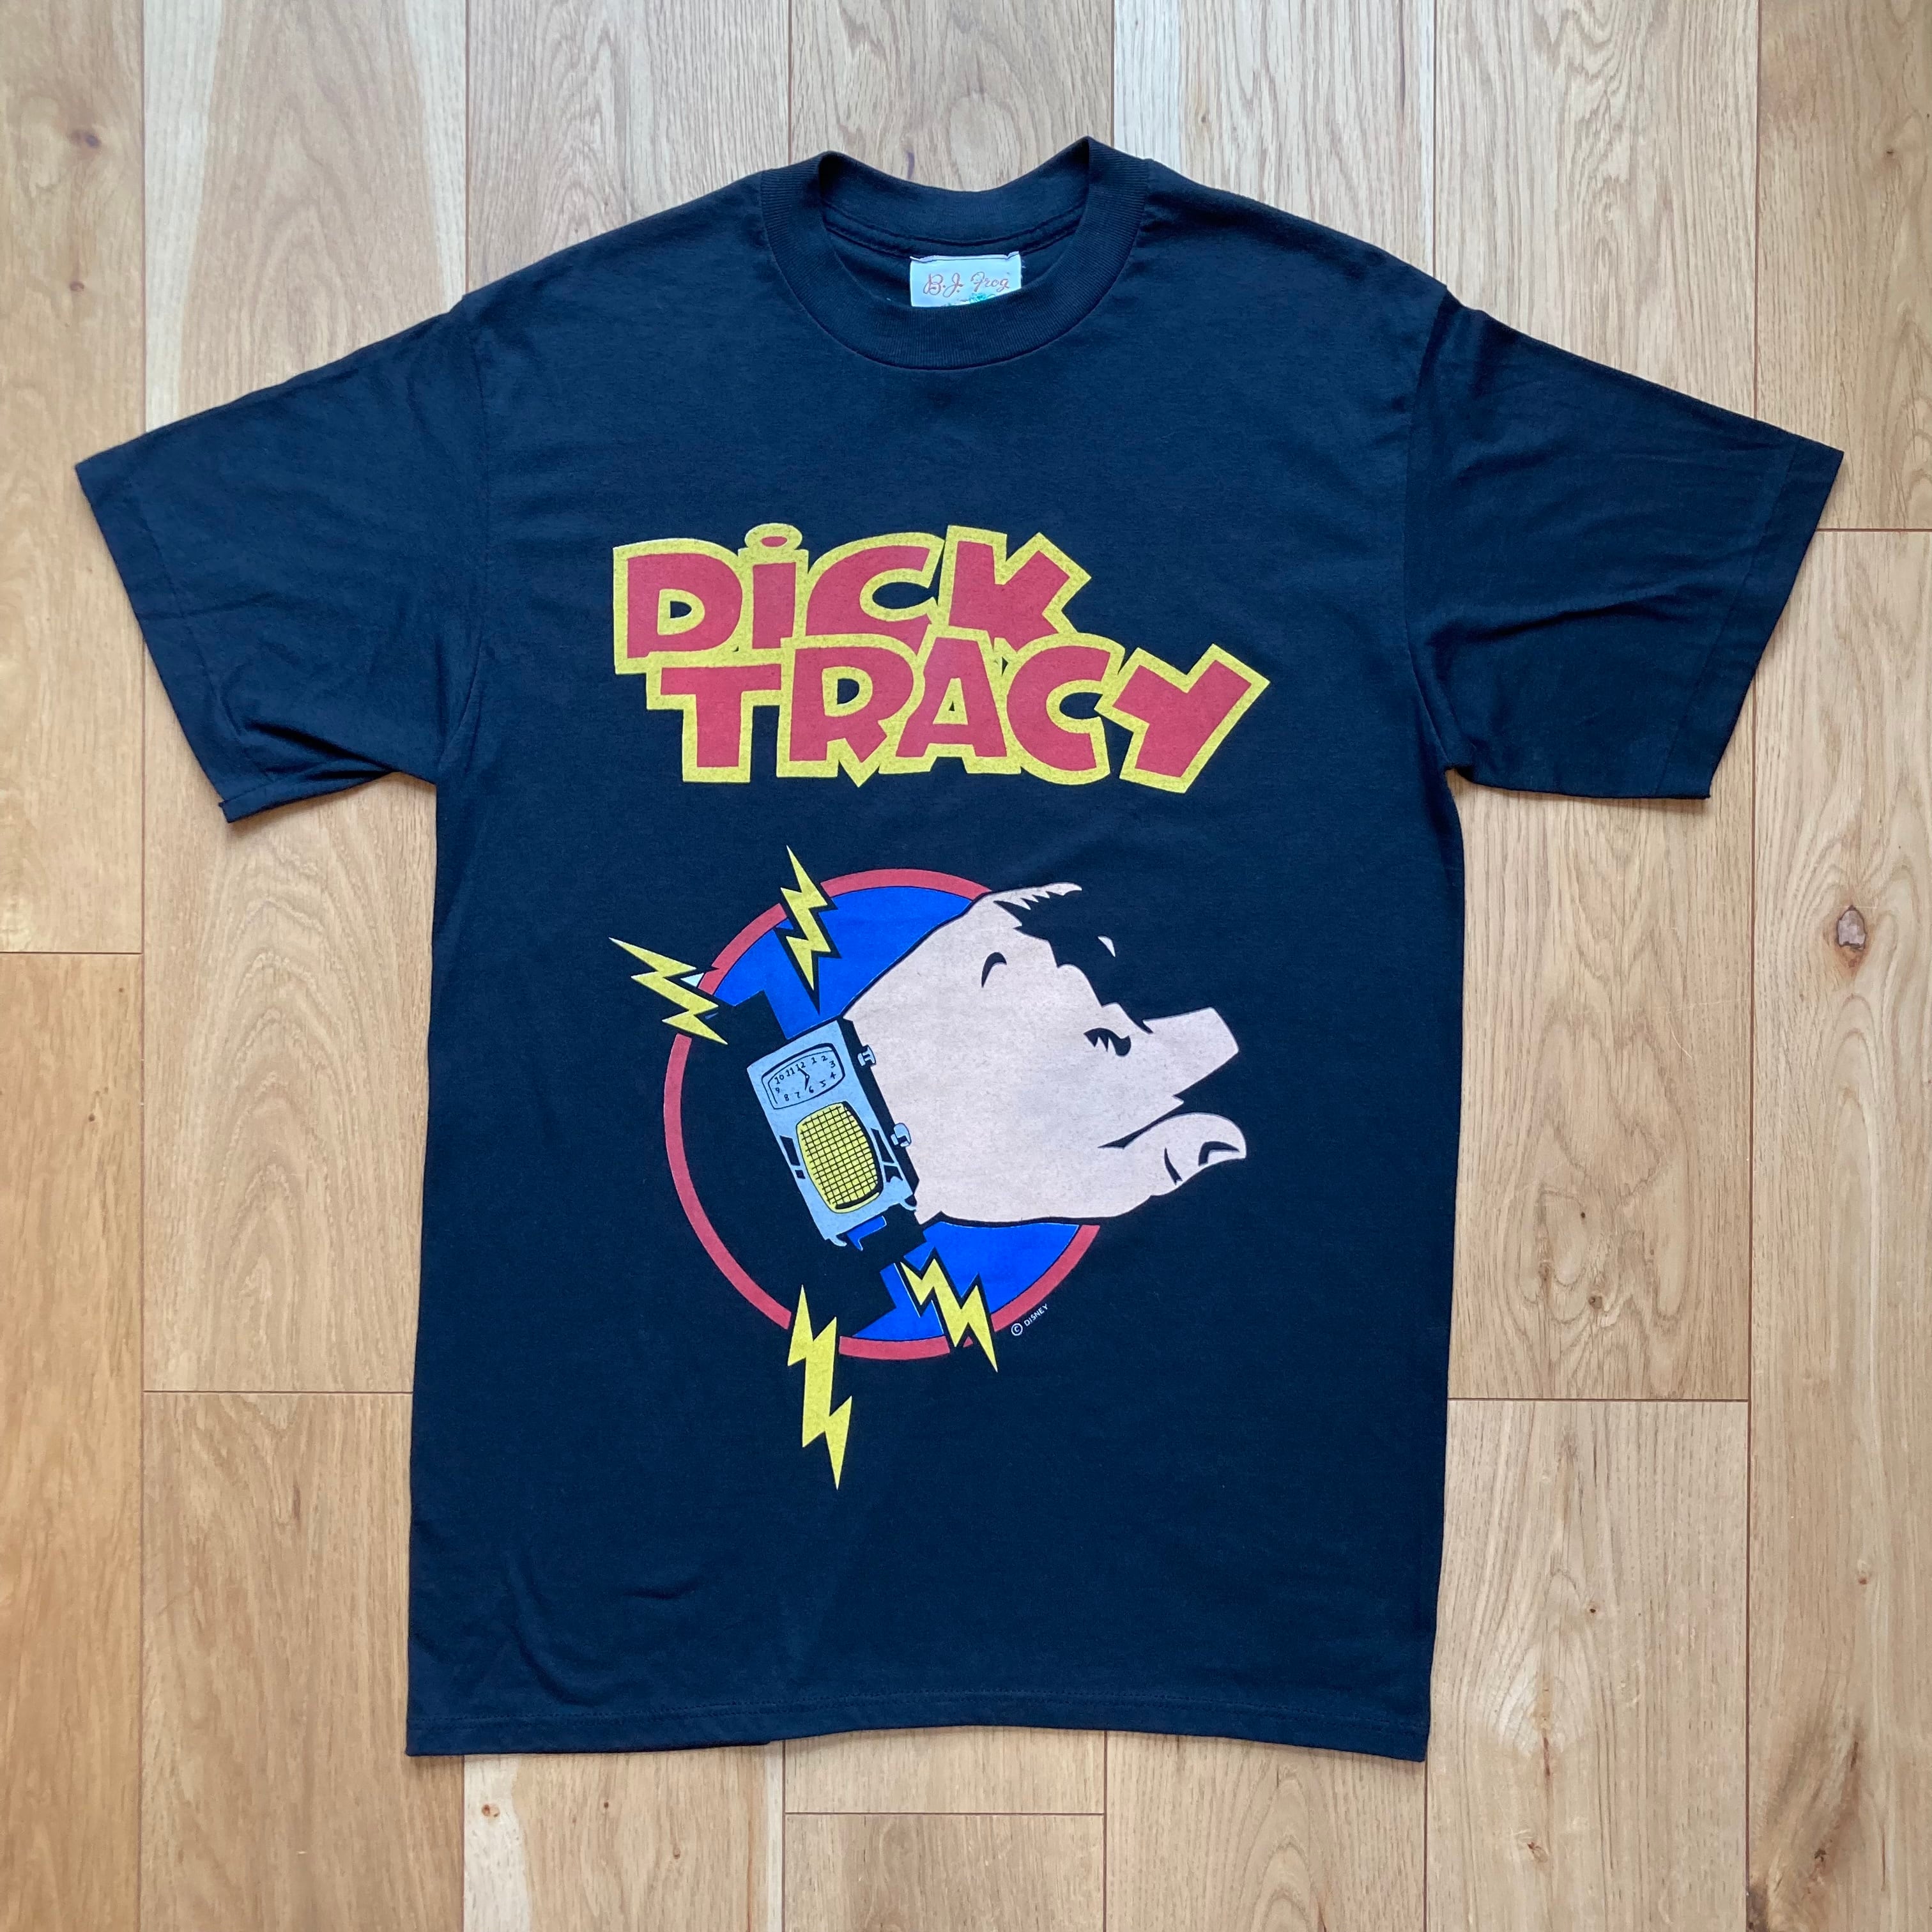 “NOS” Dick Tracy Tee